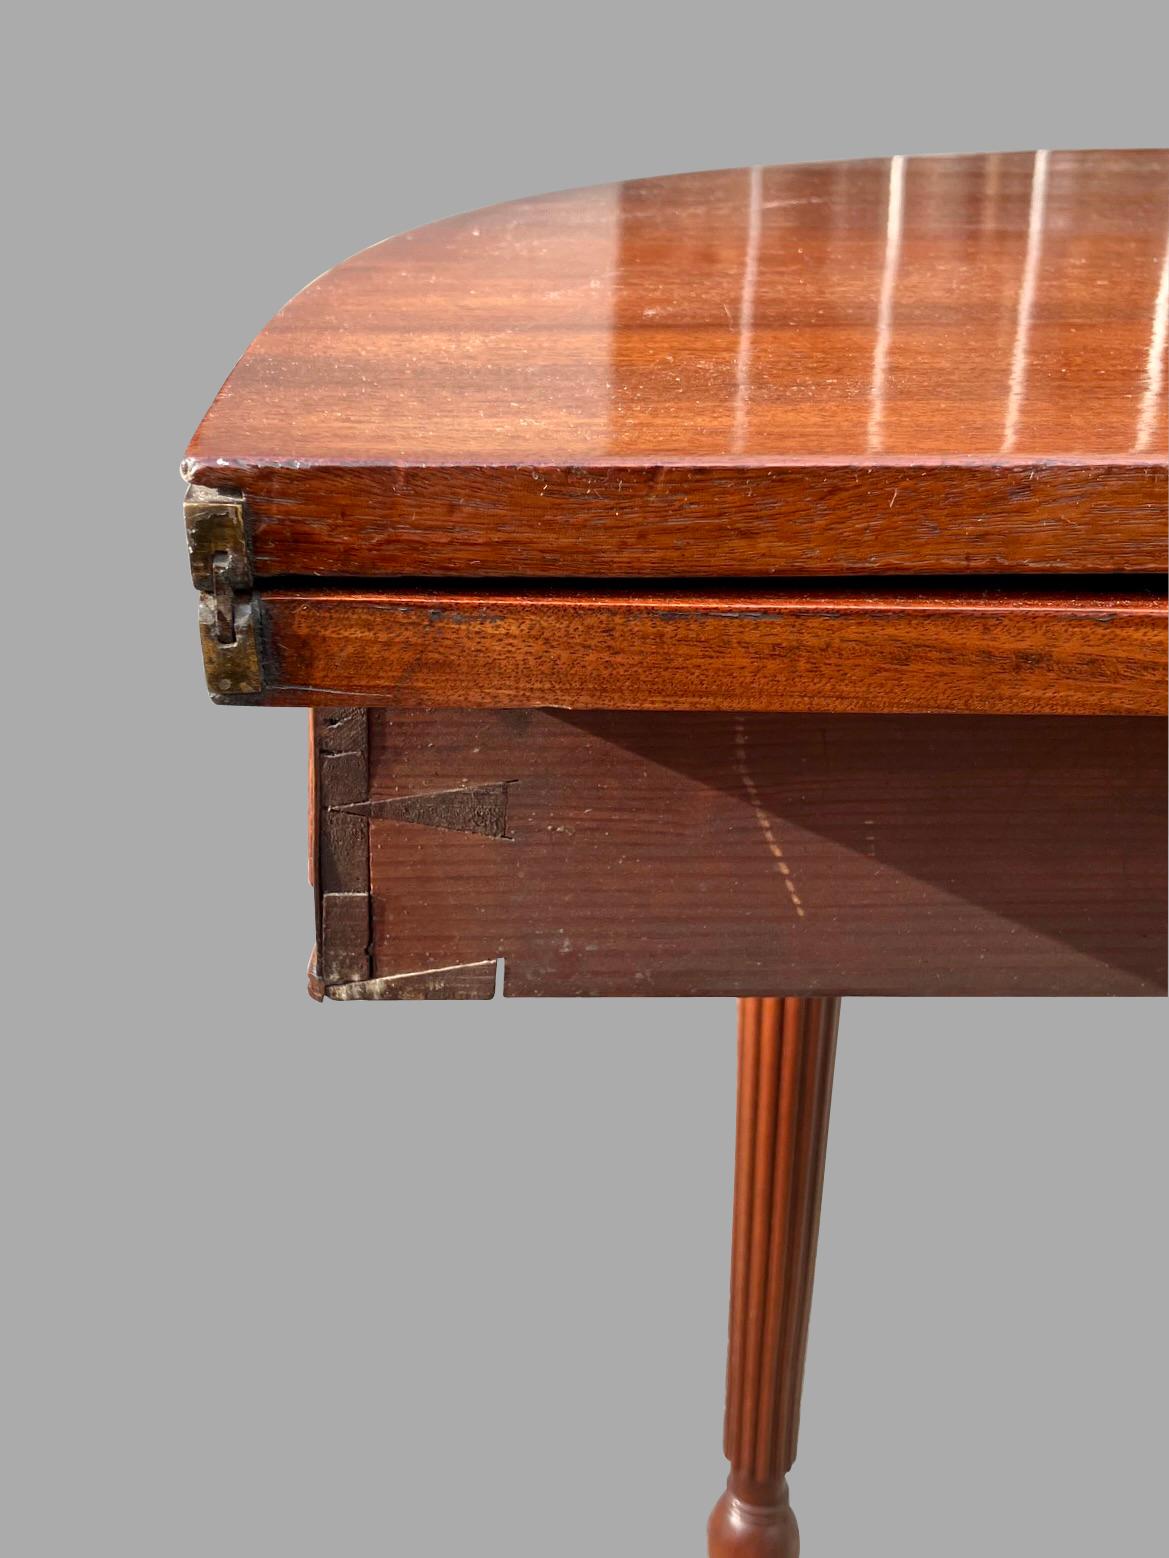 English Regency Period Mahogany Flip Top Game or Tea Table with Reeded Legs For Sale 5